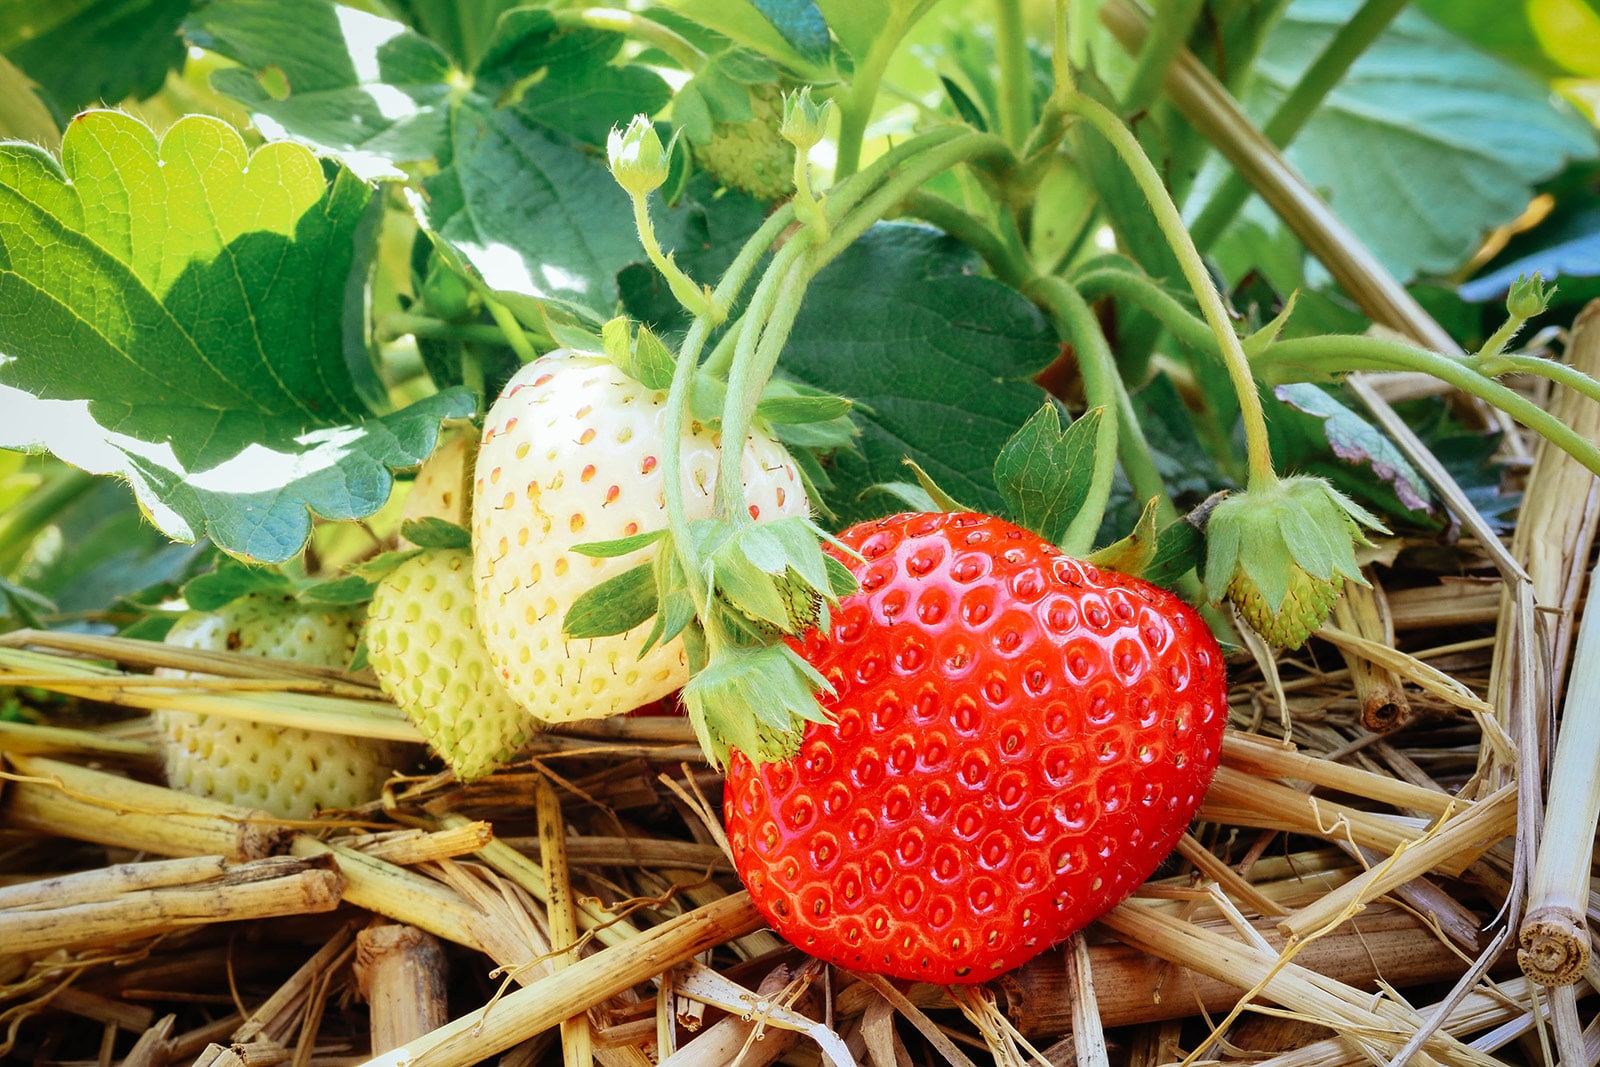 Close-up of strawberry plant bearing ripe and unripe berries with straw mulch around them